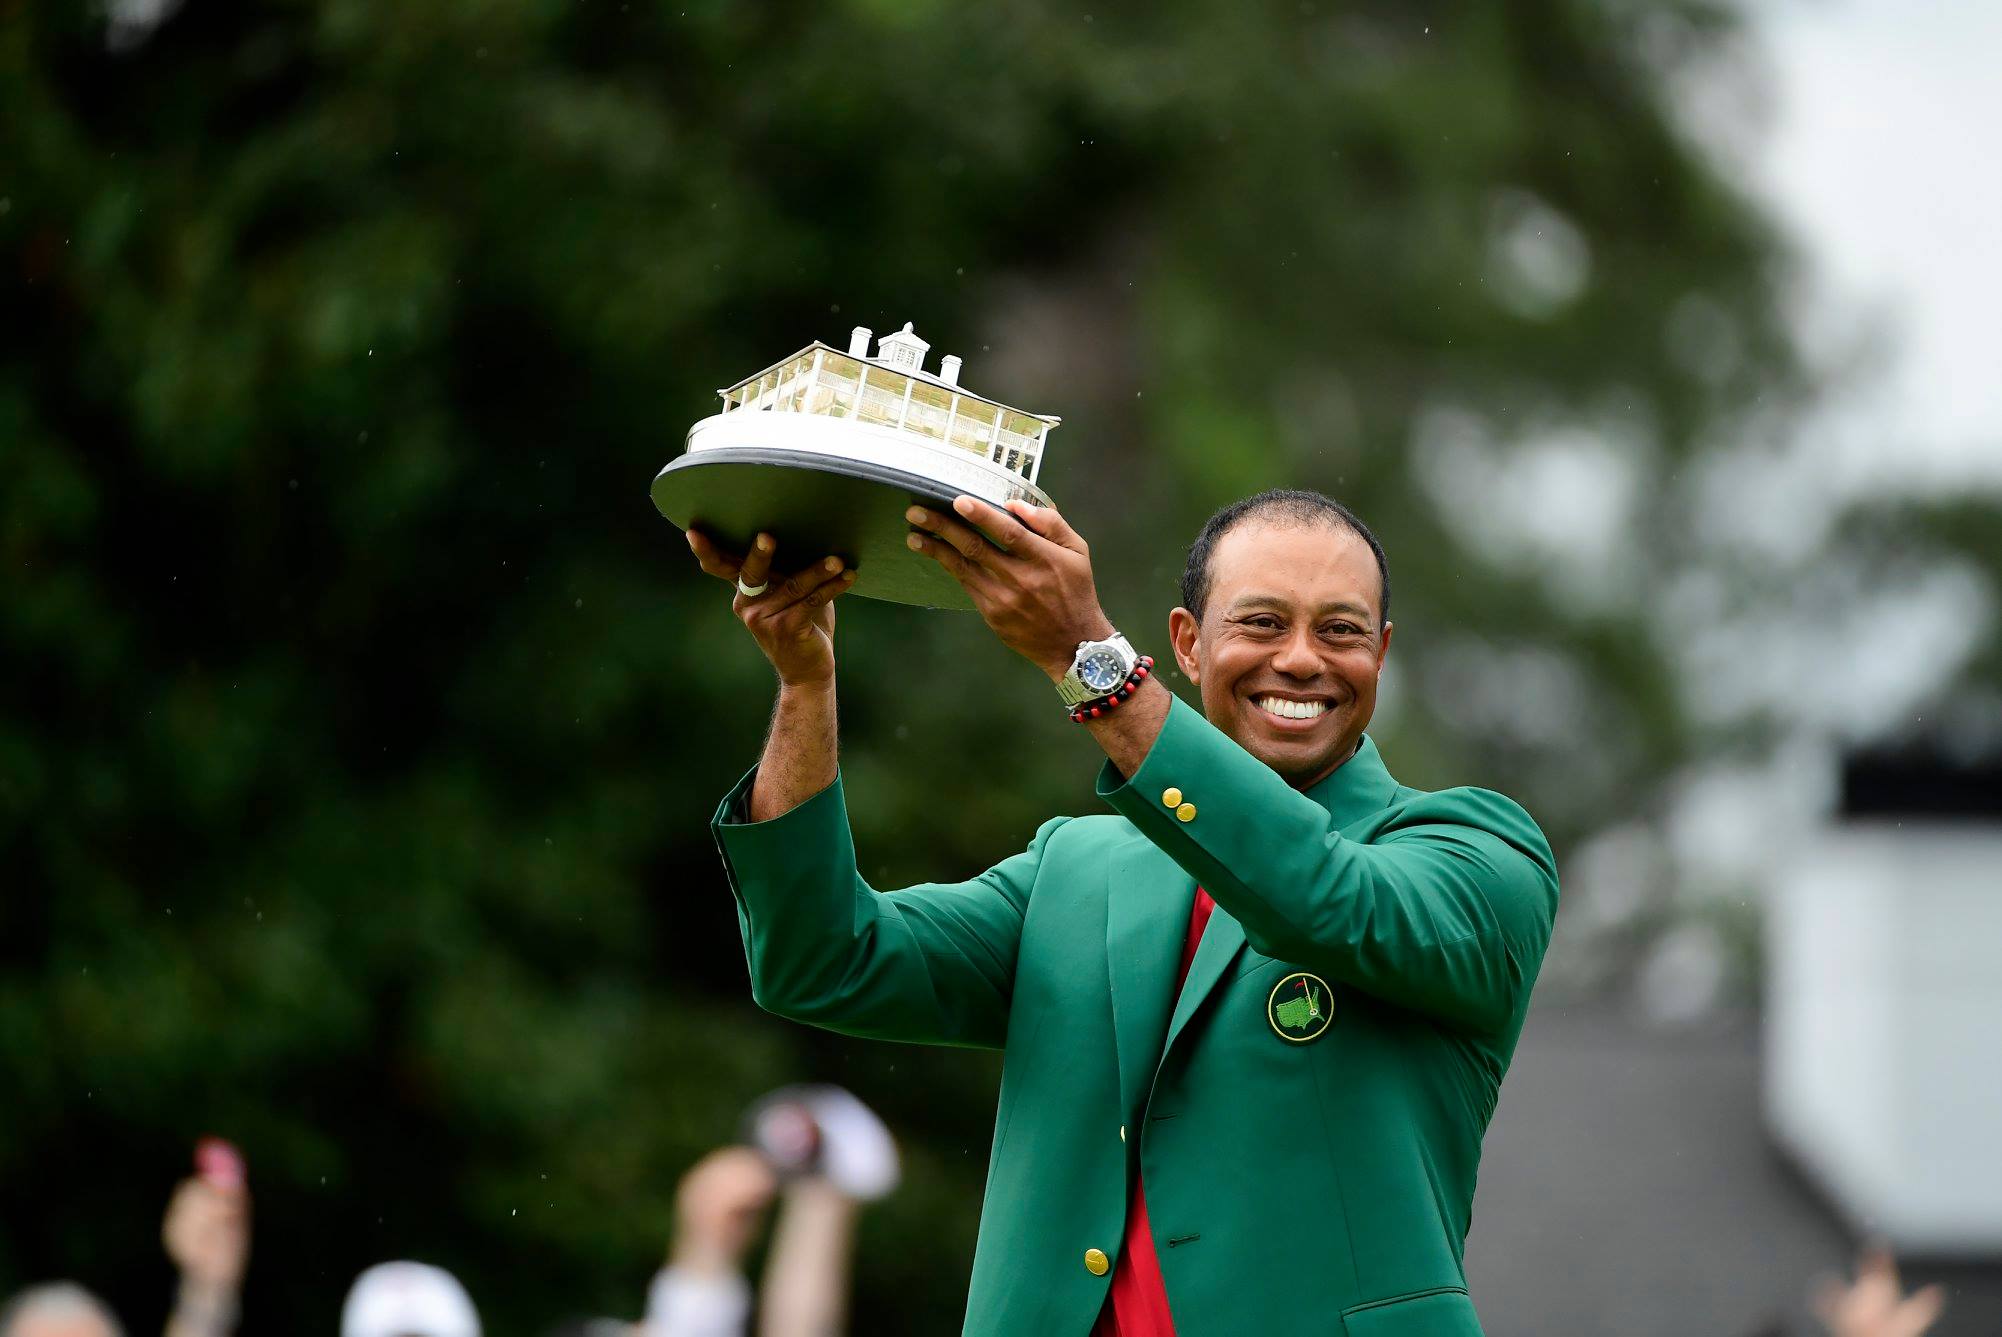 Tiger Woods winning the 2019 masters tournament